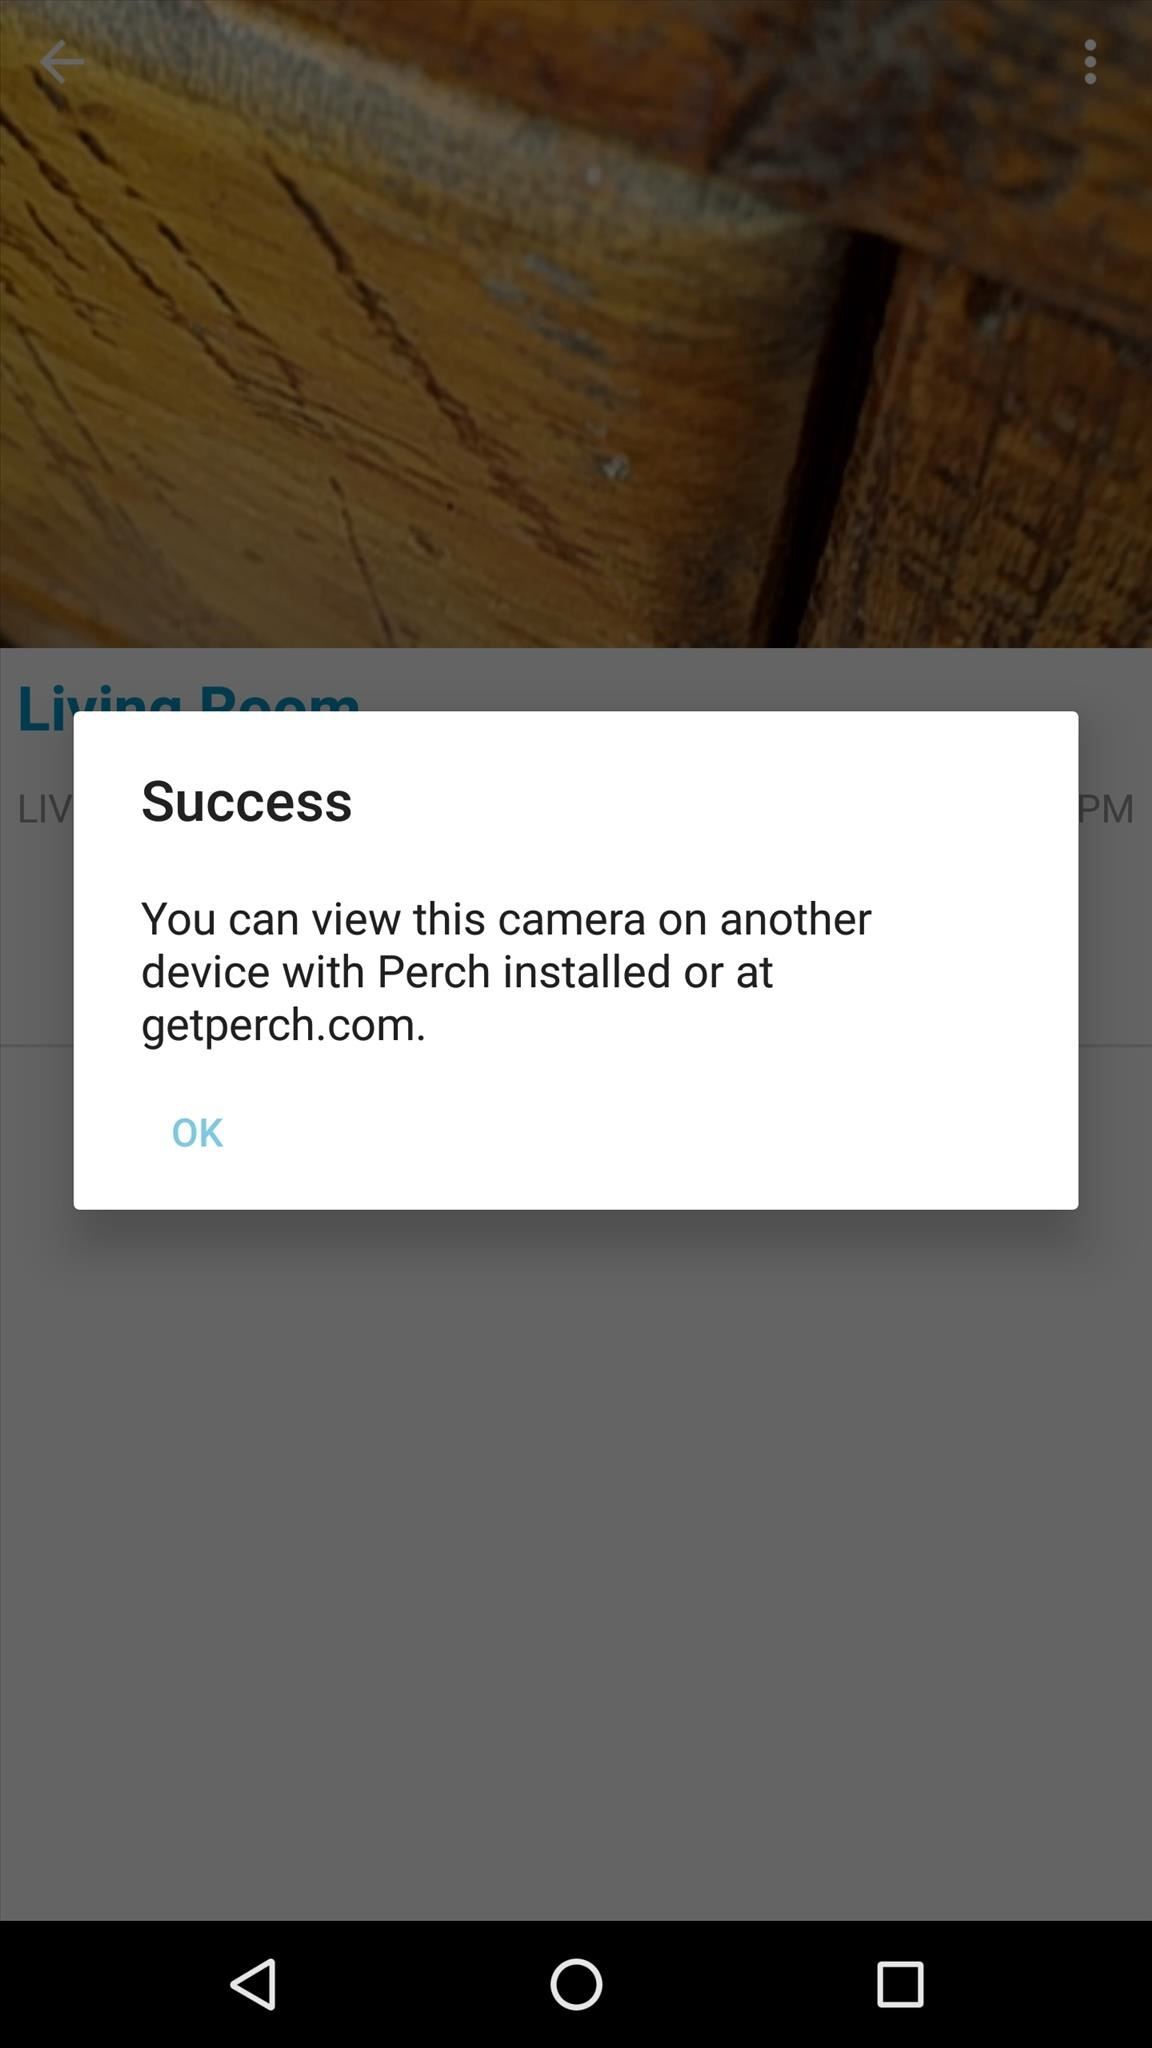 How to Turn an Old Android Device into a Security Camera